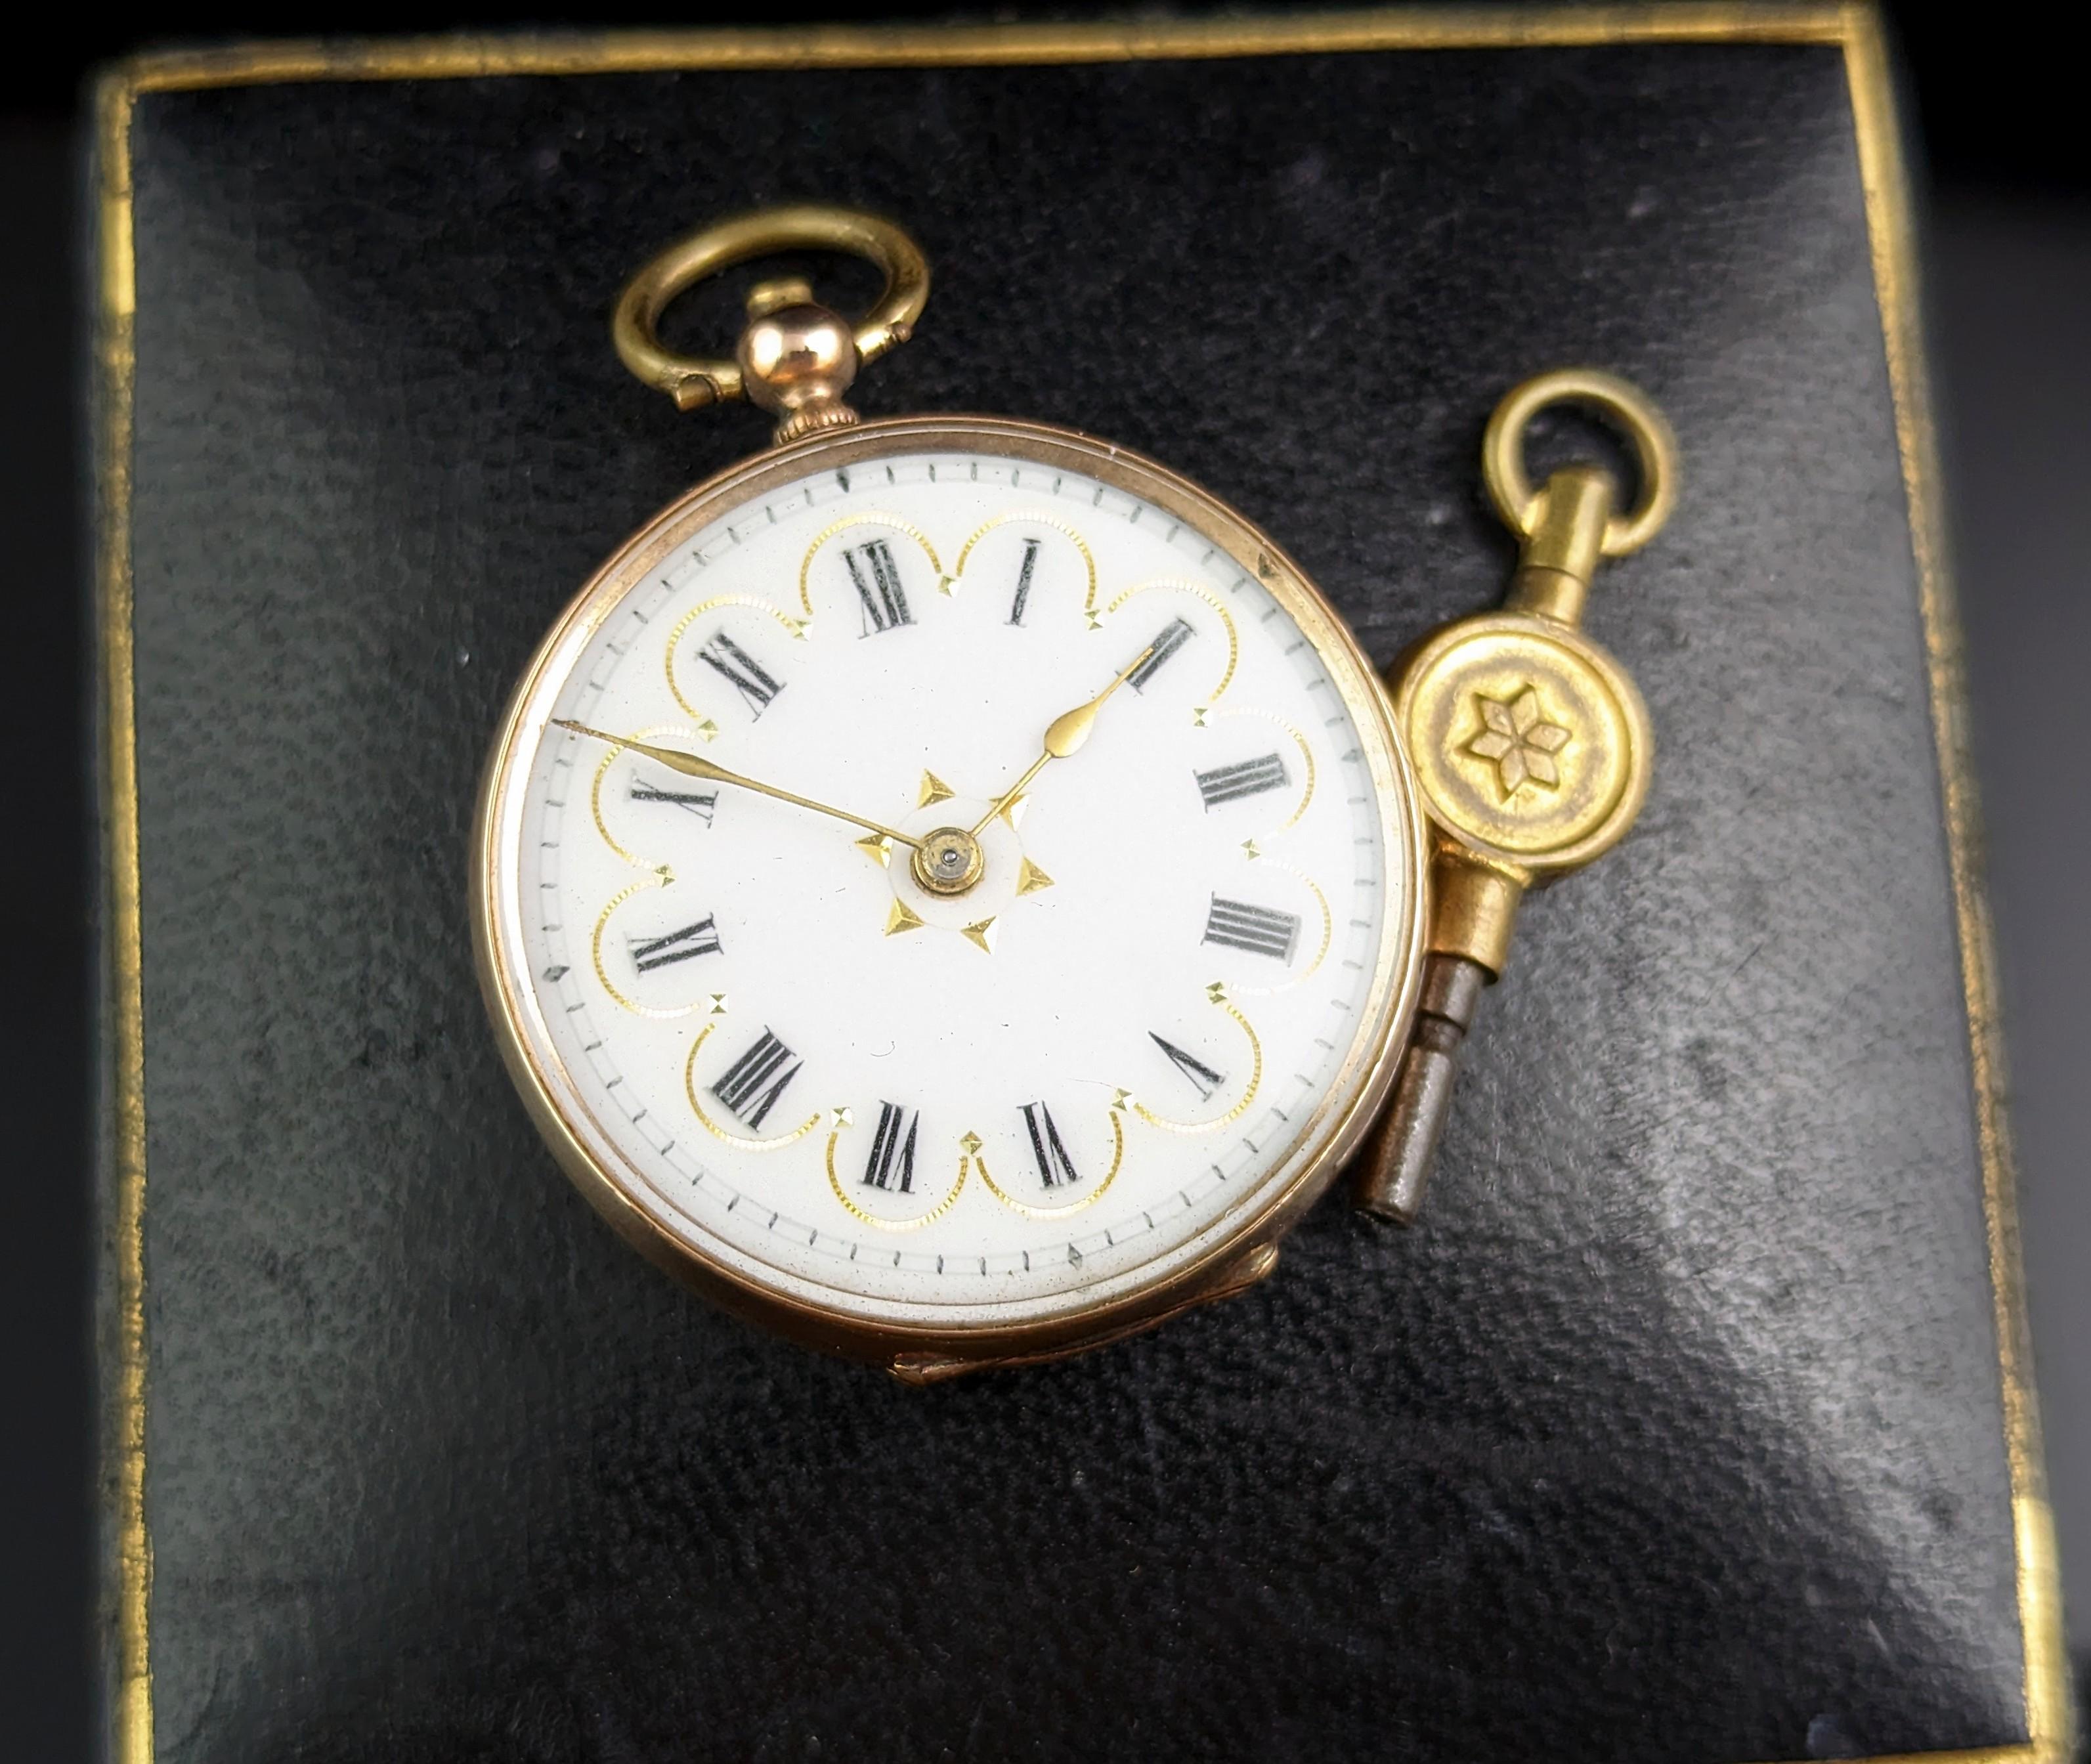 This antique ladies 9ct gold fob watch is the perfect combination of style and practicality.

The pocket watch is intricately designed with floral engravings to the reverse with a white enamel dial, gold tone hands and a delightful gold accent